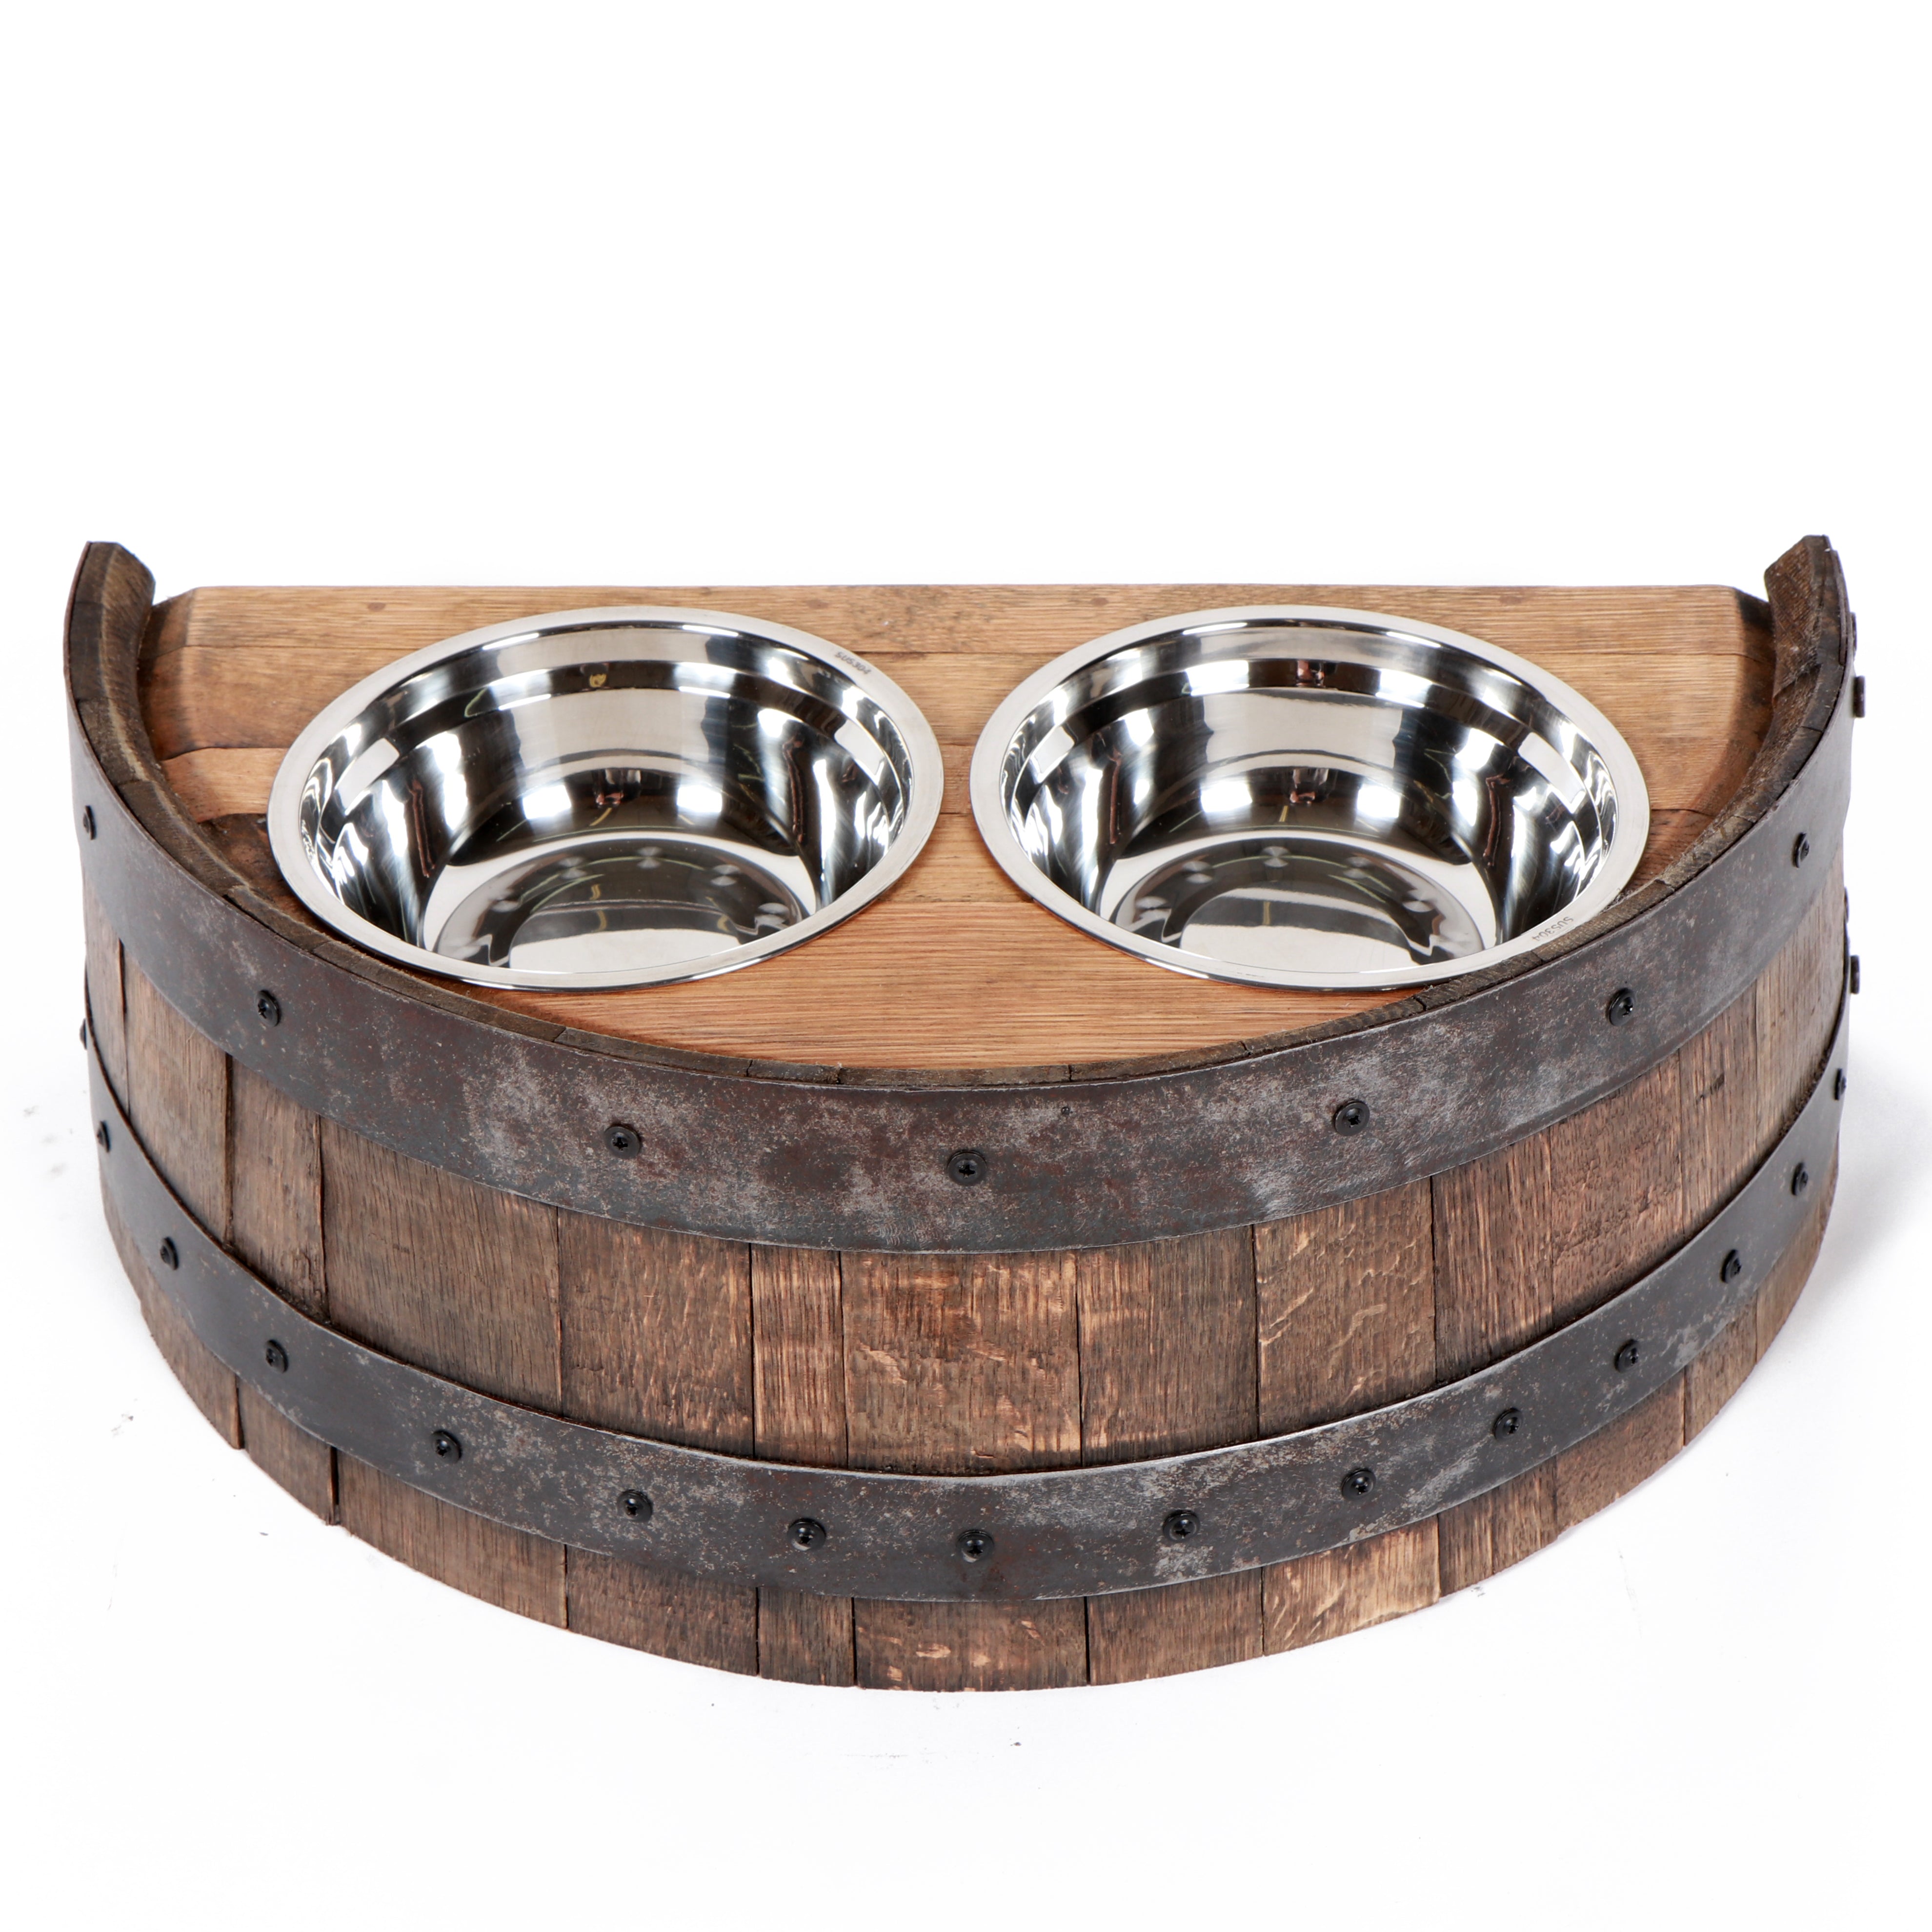 Whiskey Barrel Products for Pets  Raised Pet Feeder - Motor City